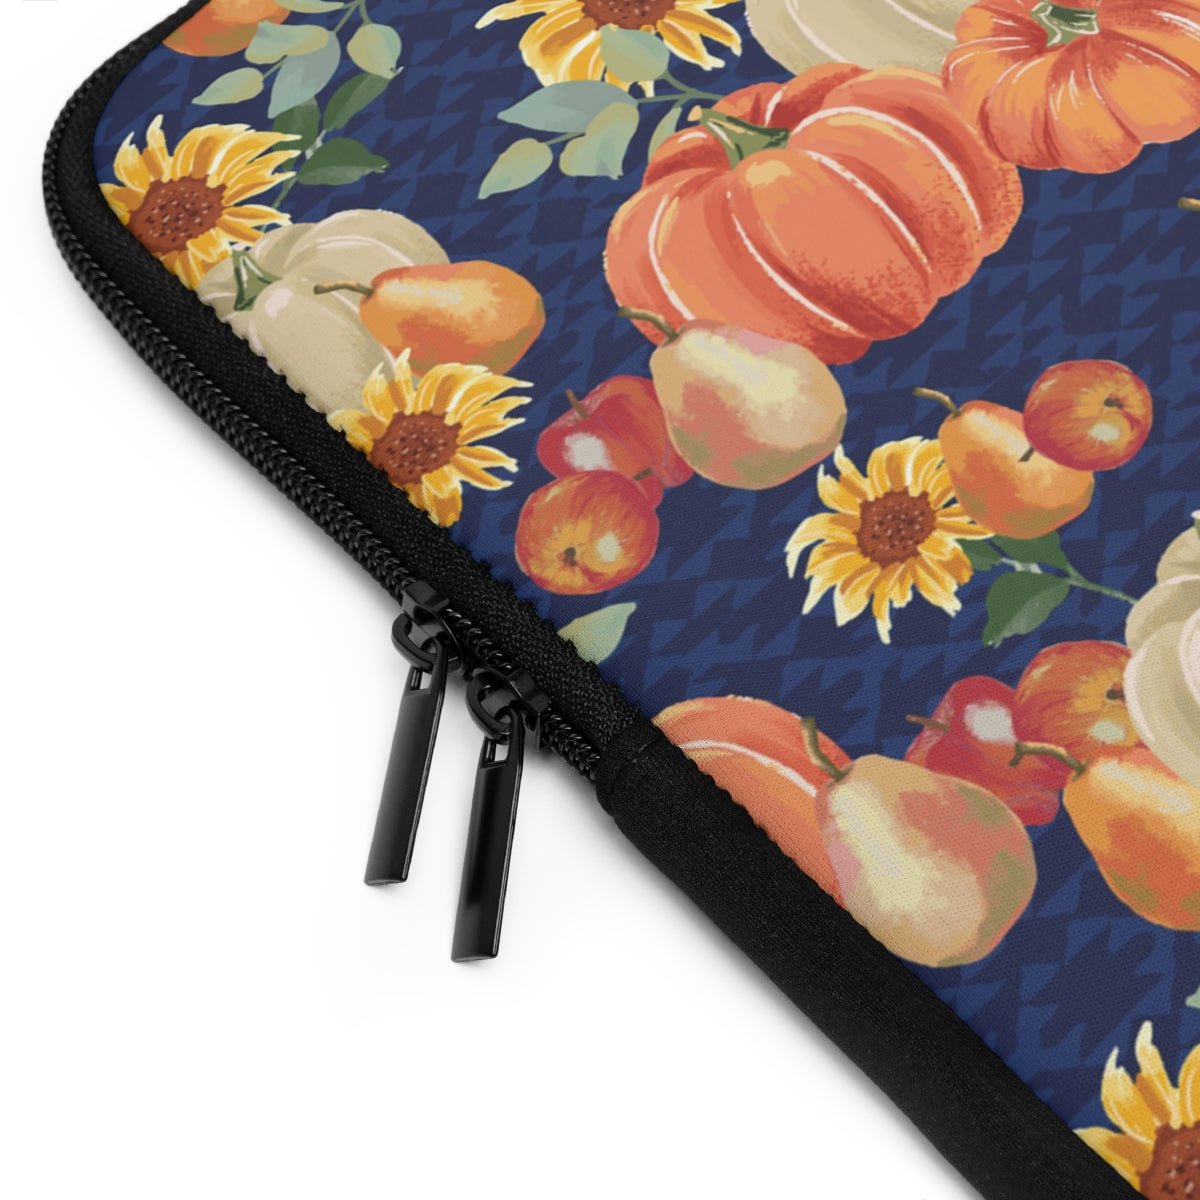 Fall Pumpkins and Sunflowers Laptop Sleeve - Puffin Lime